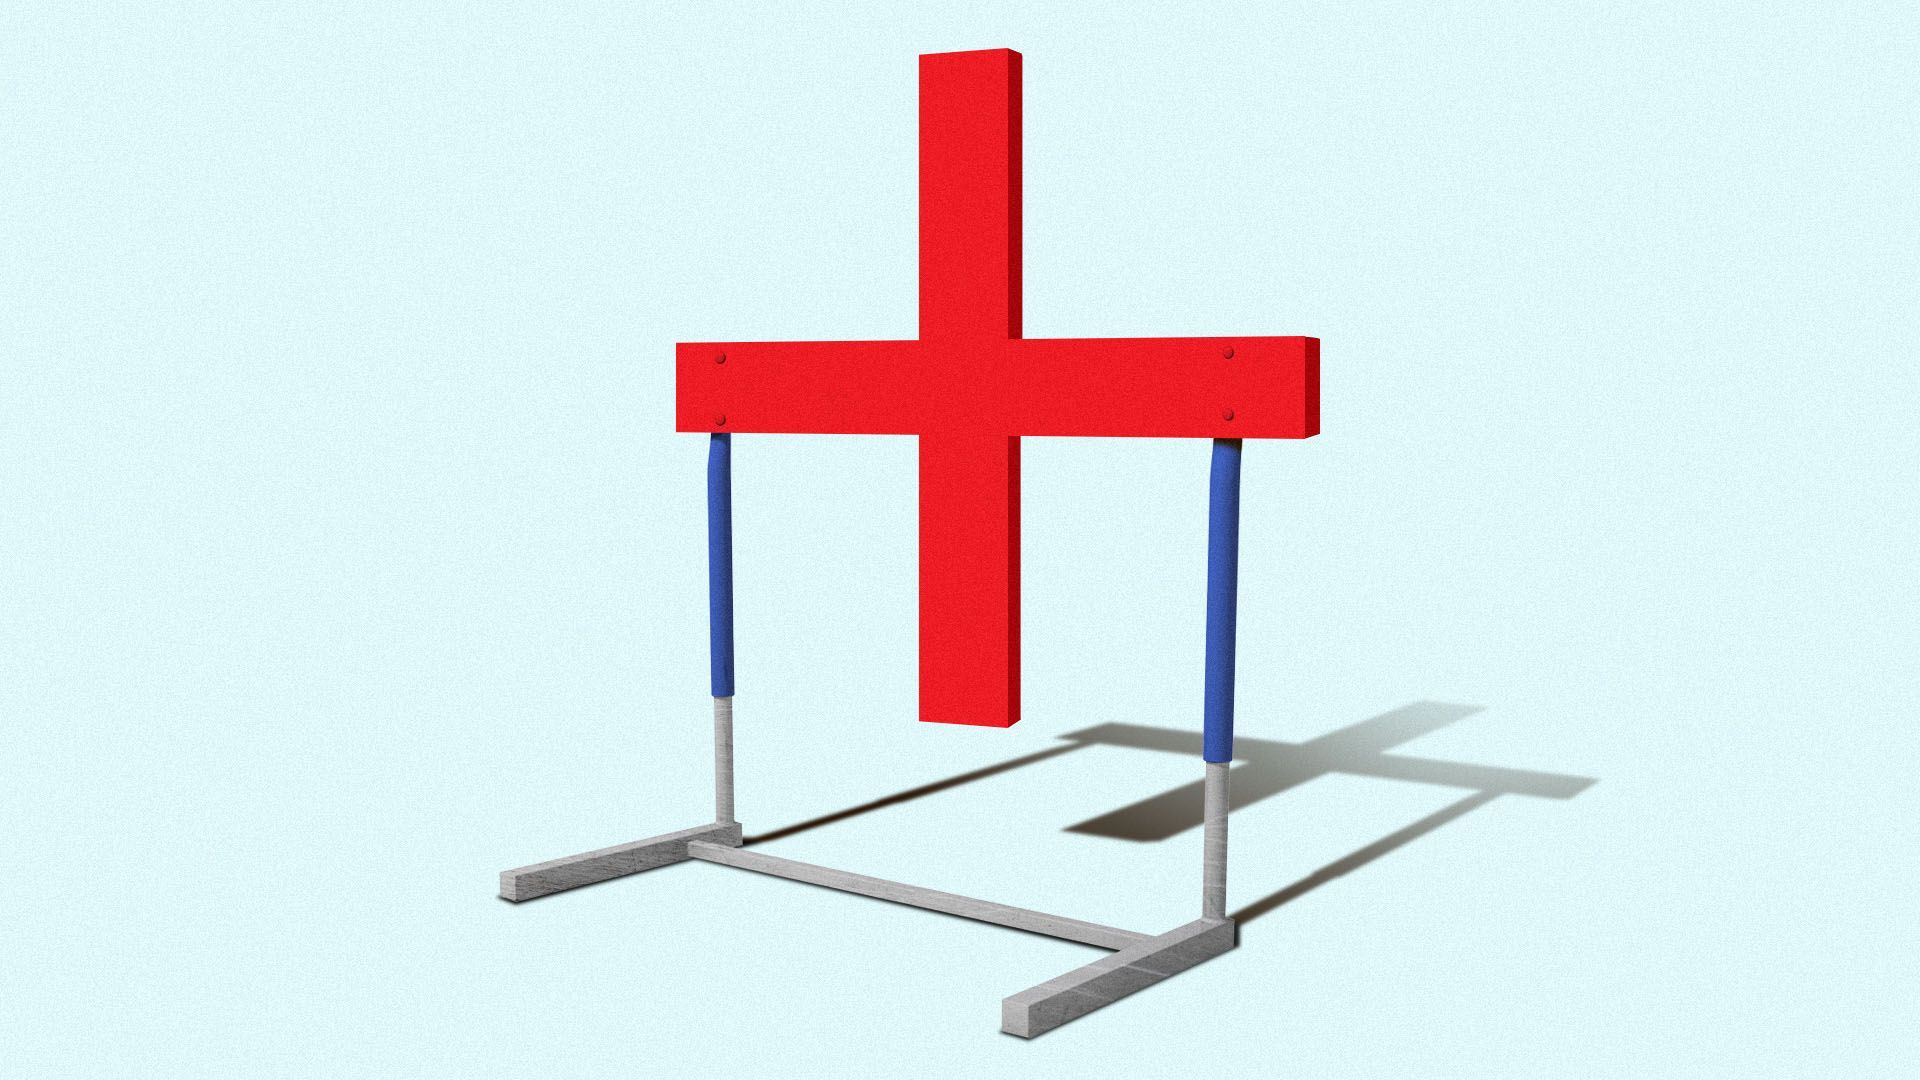 Illustration of a red cross on a hurdle